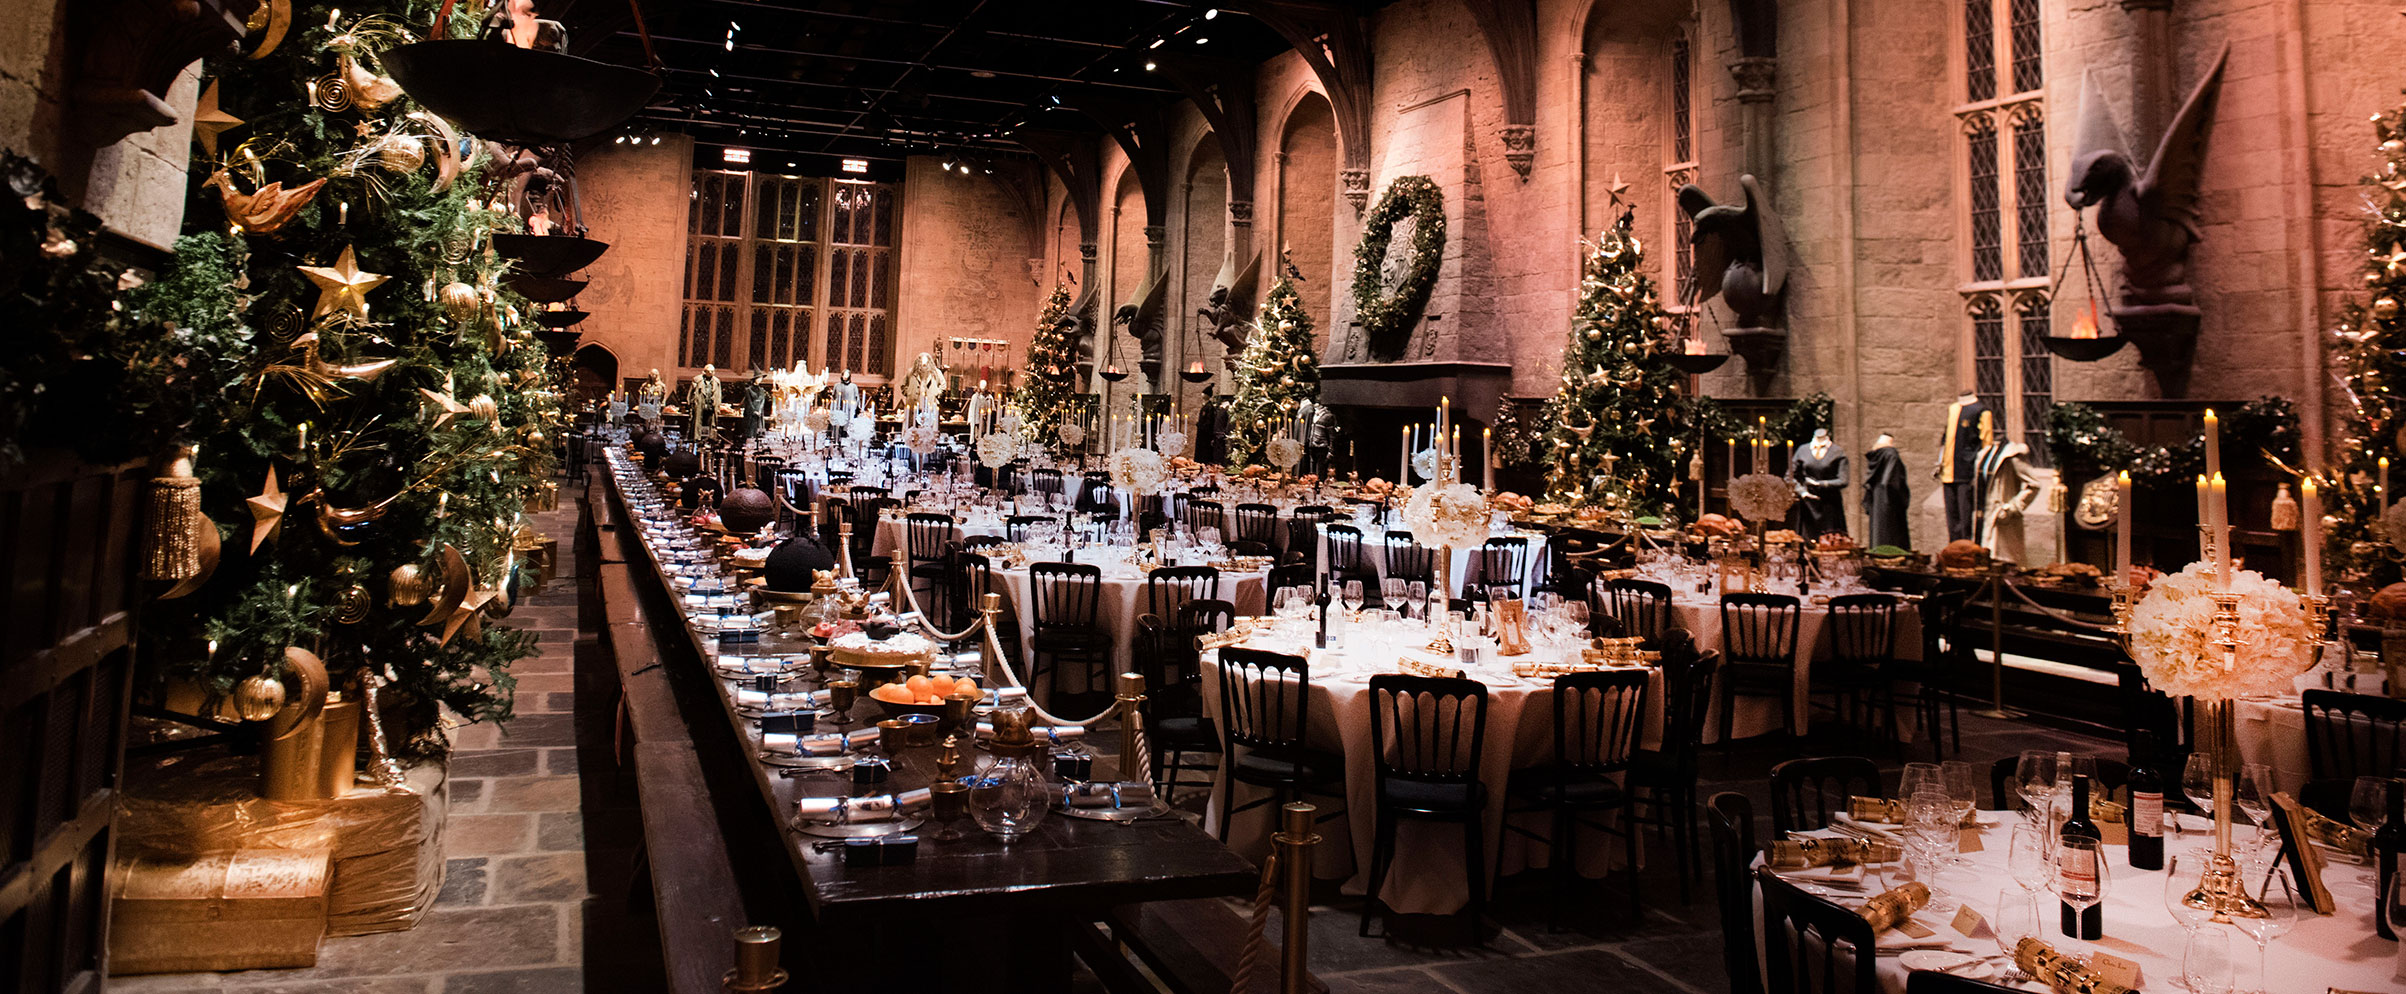 Dinner in the Great Hall Events - Warner Bros. Studio Tour London